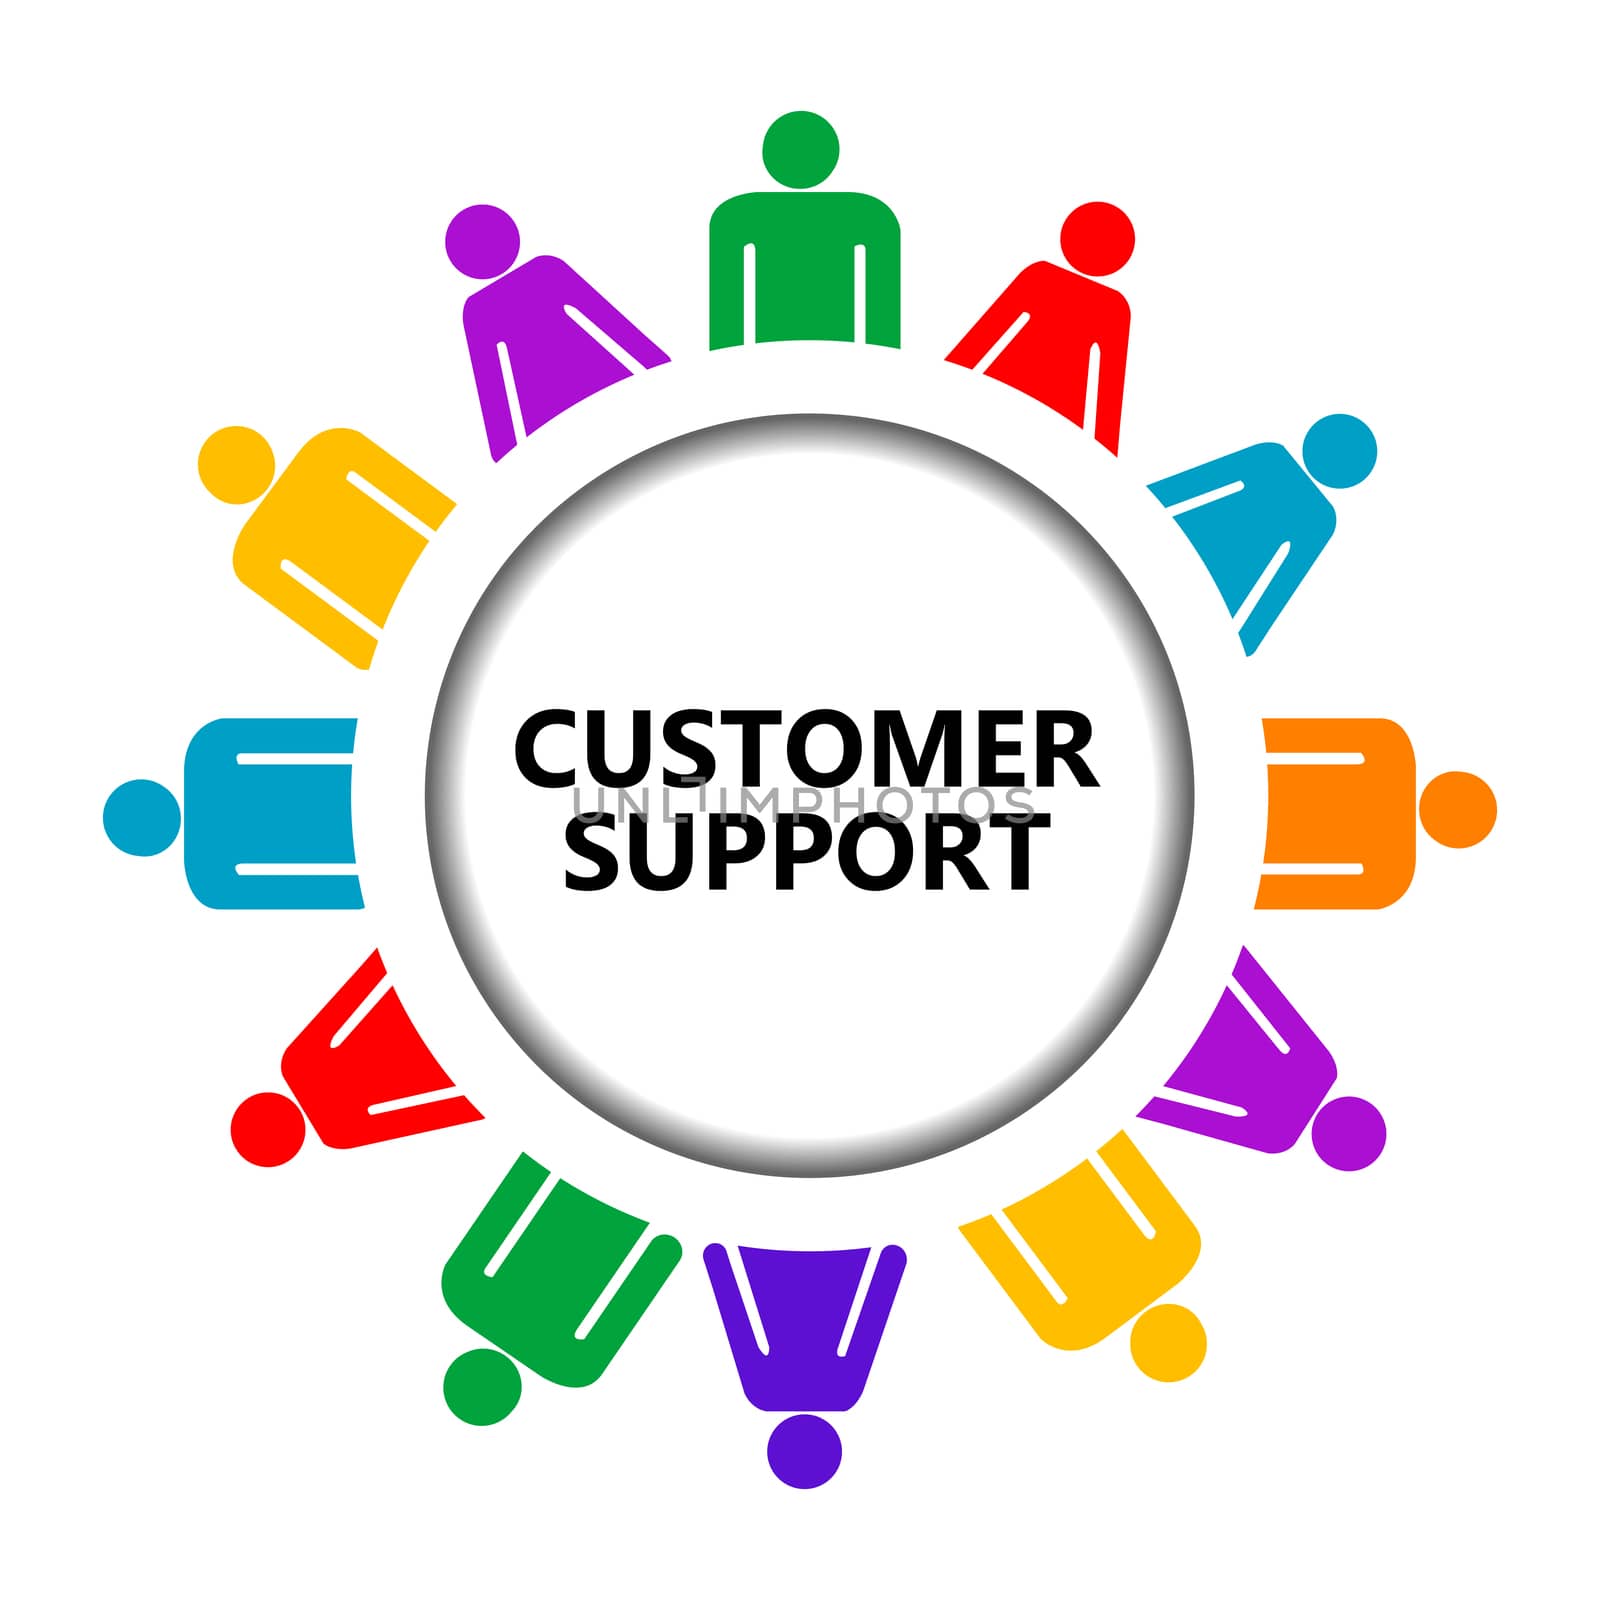 Customer support icon with group of people on white background